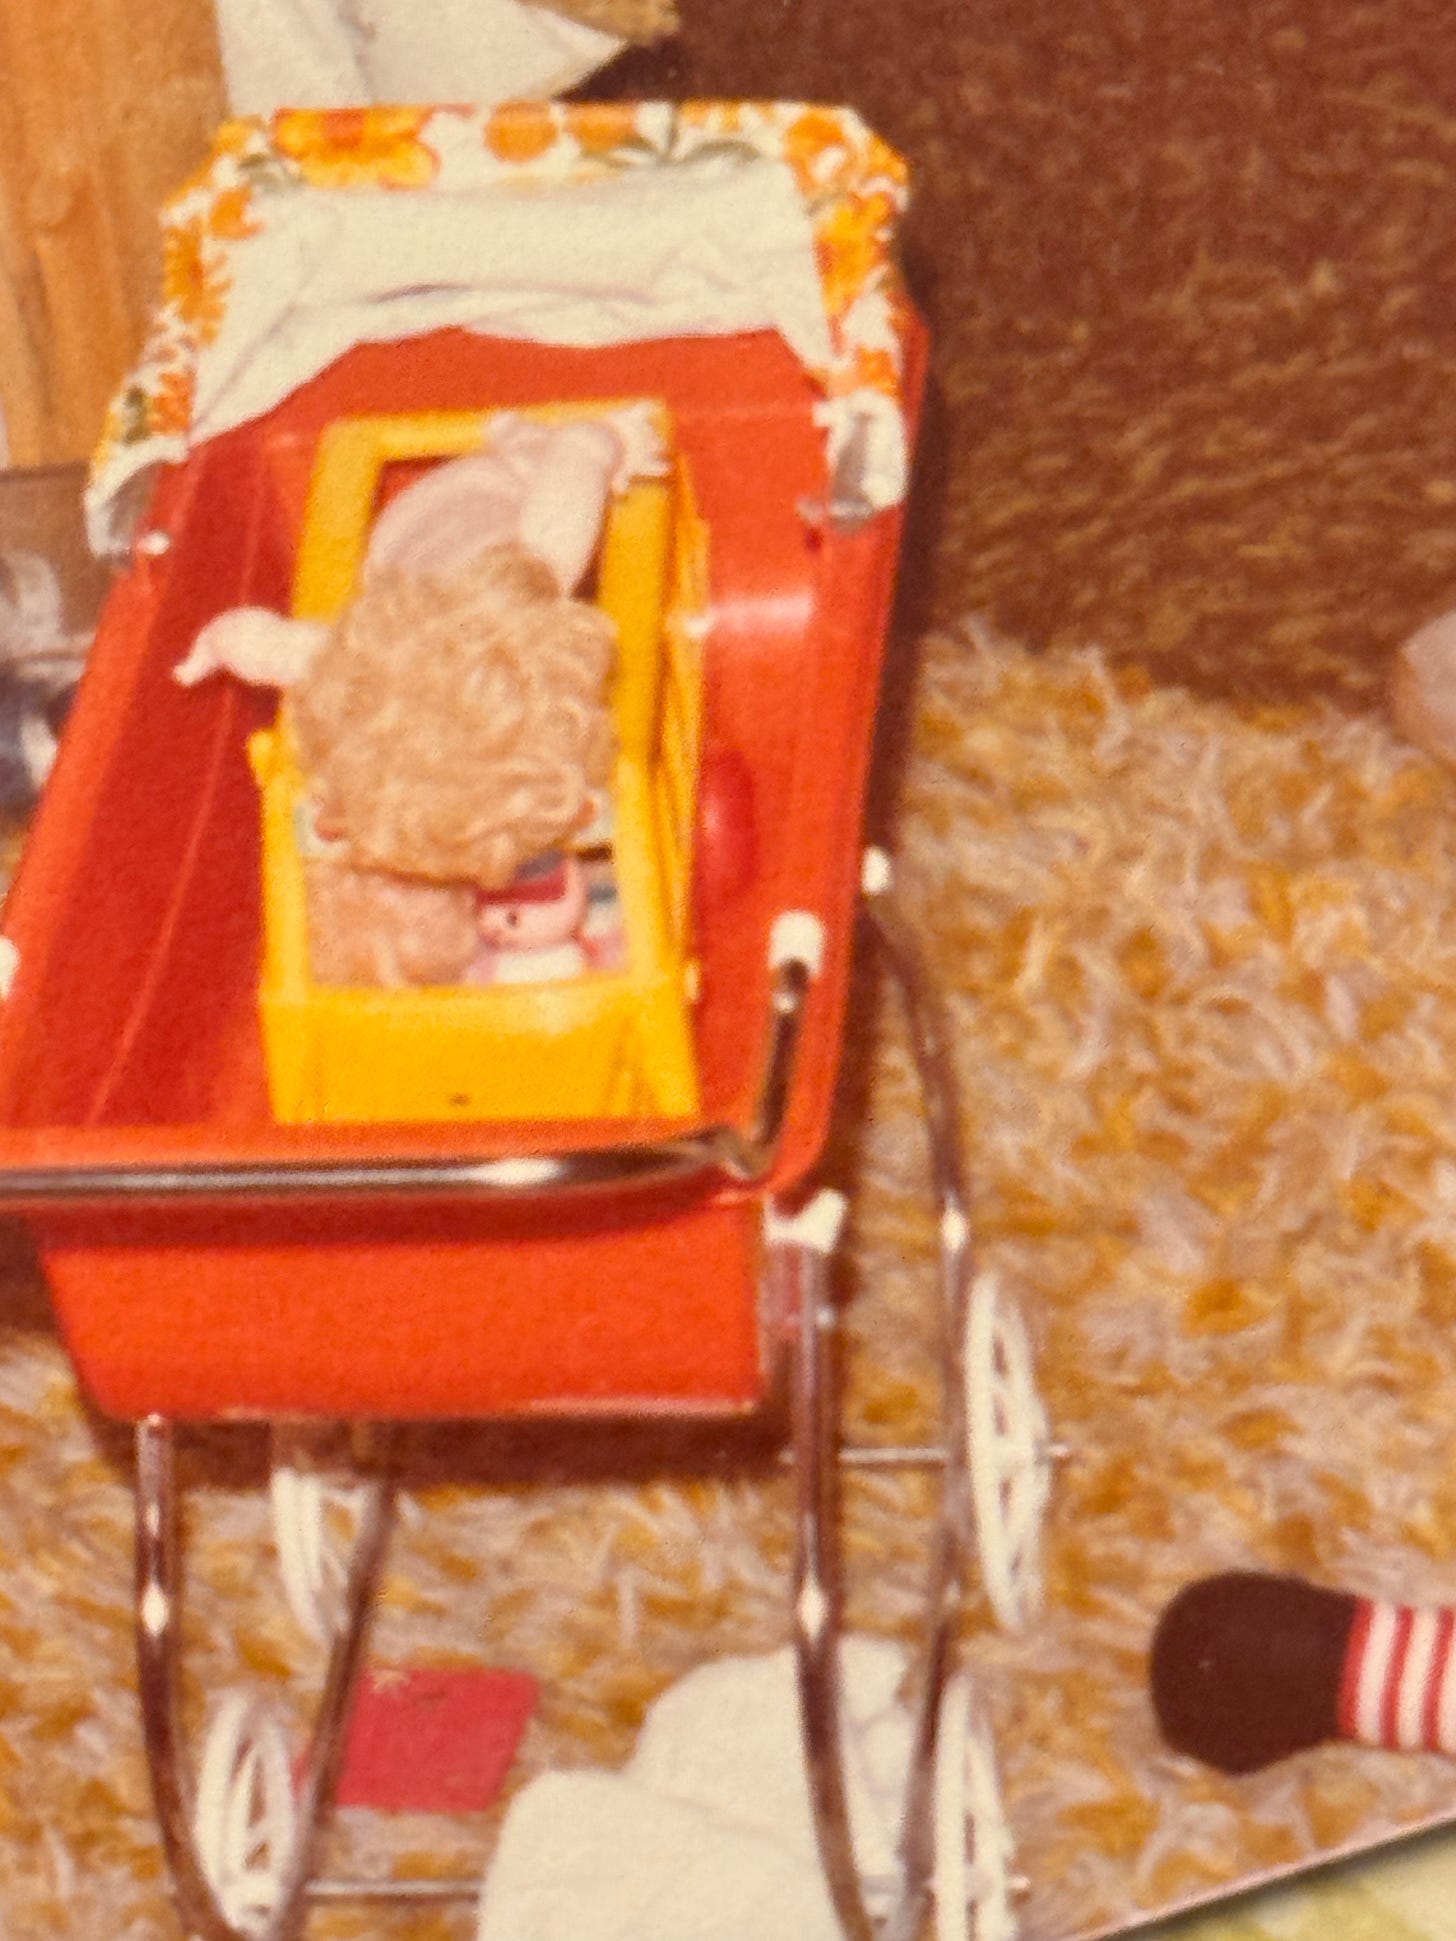 zoomed in image of a 1970s orange plastic stroller with a small yellow schoolbus inside holding a plastic baby doll